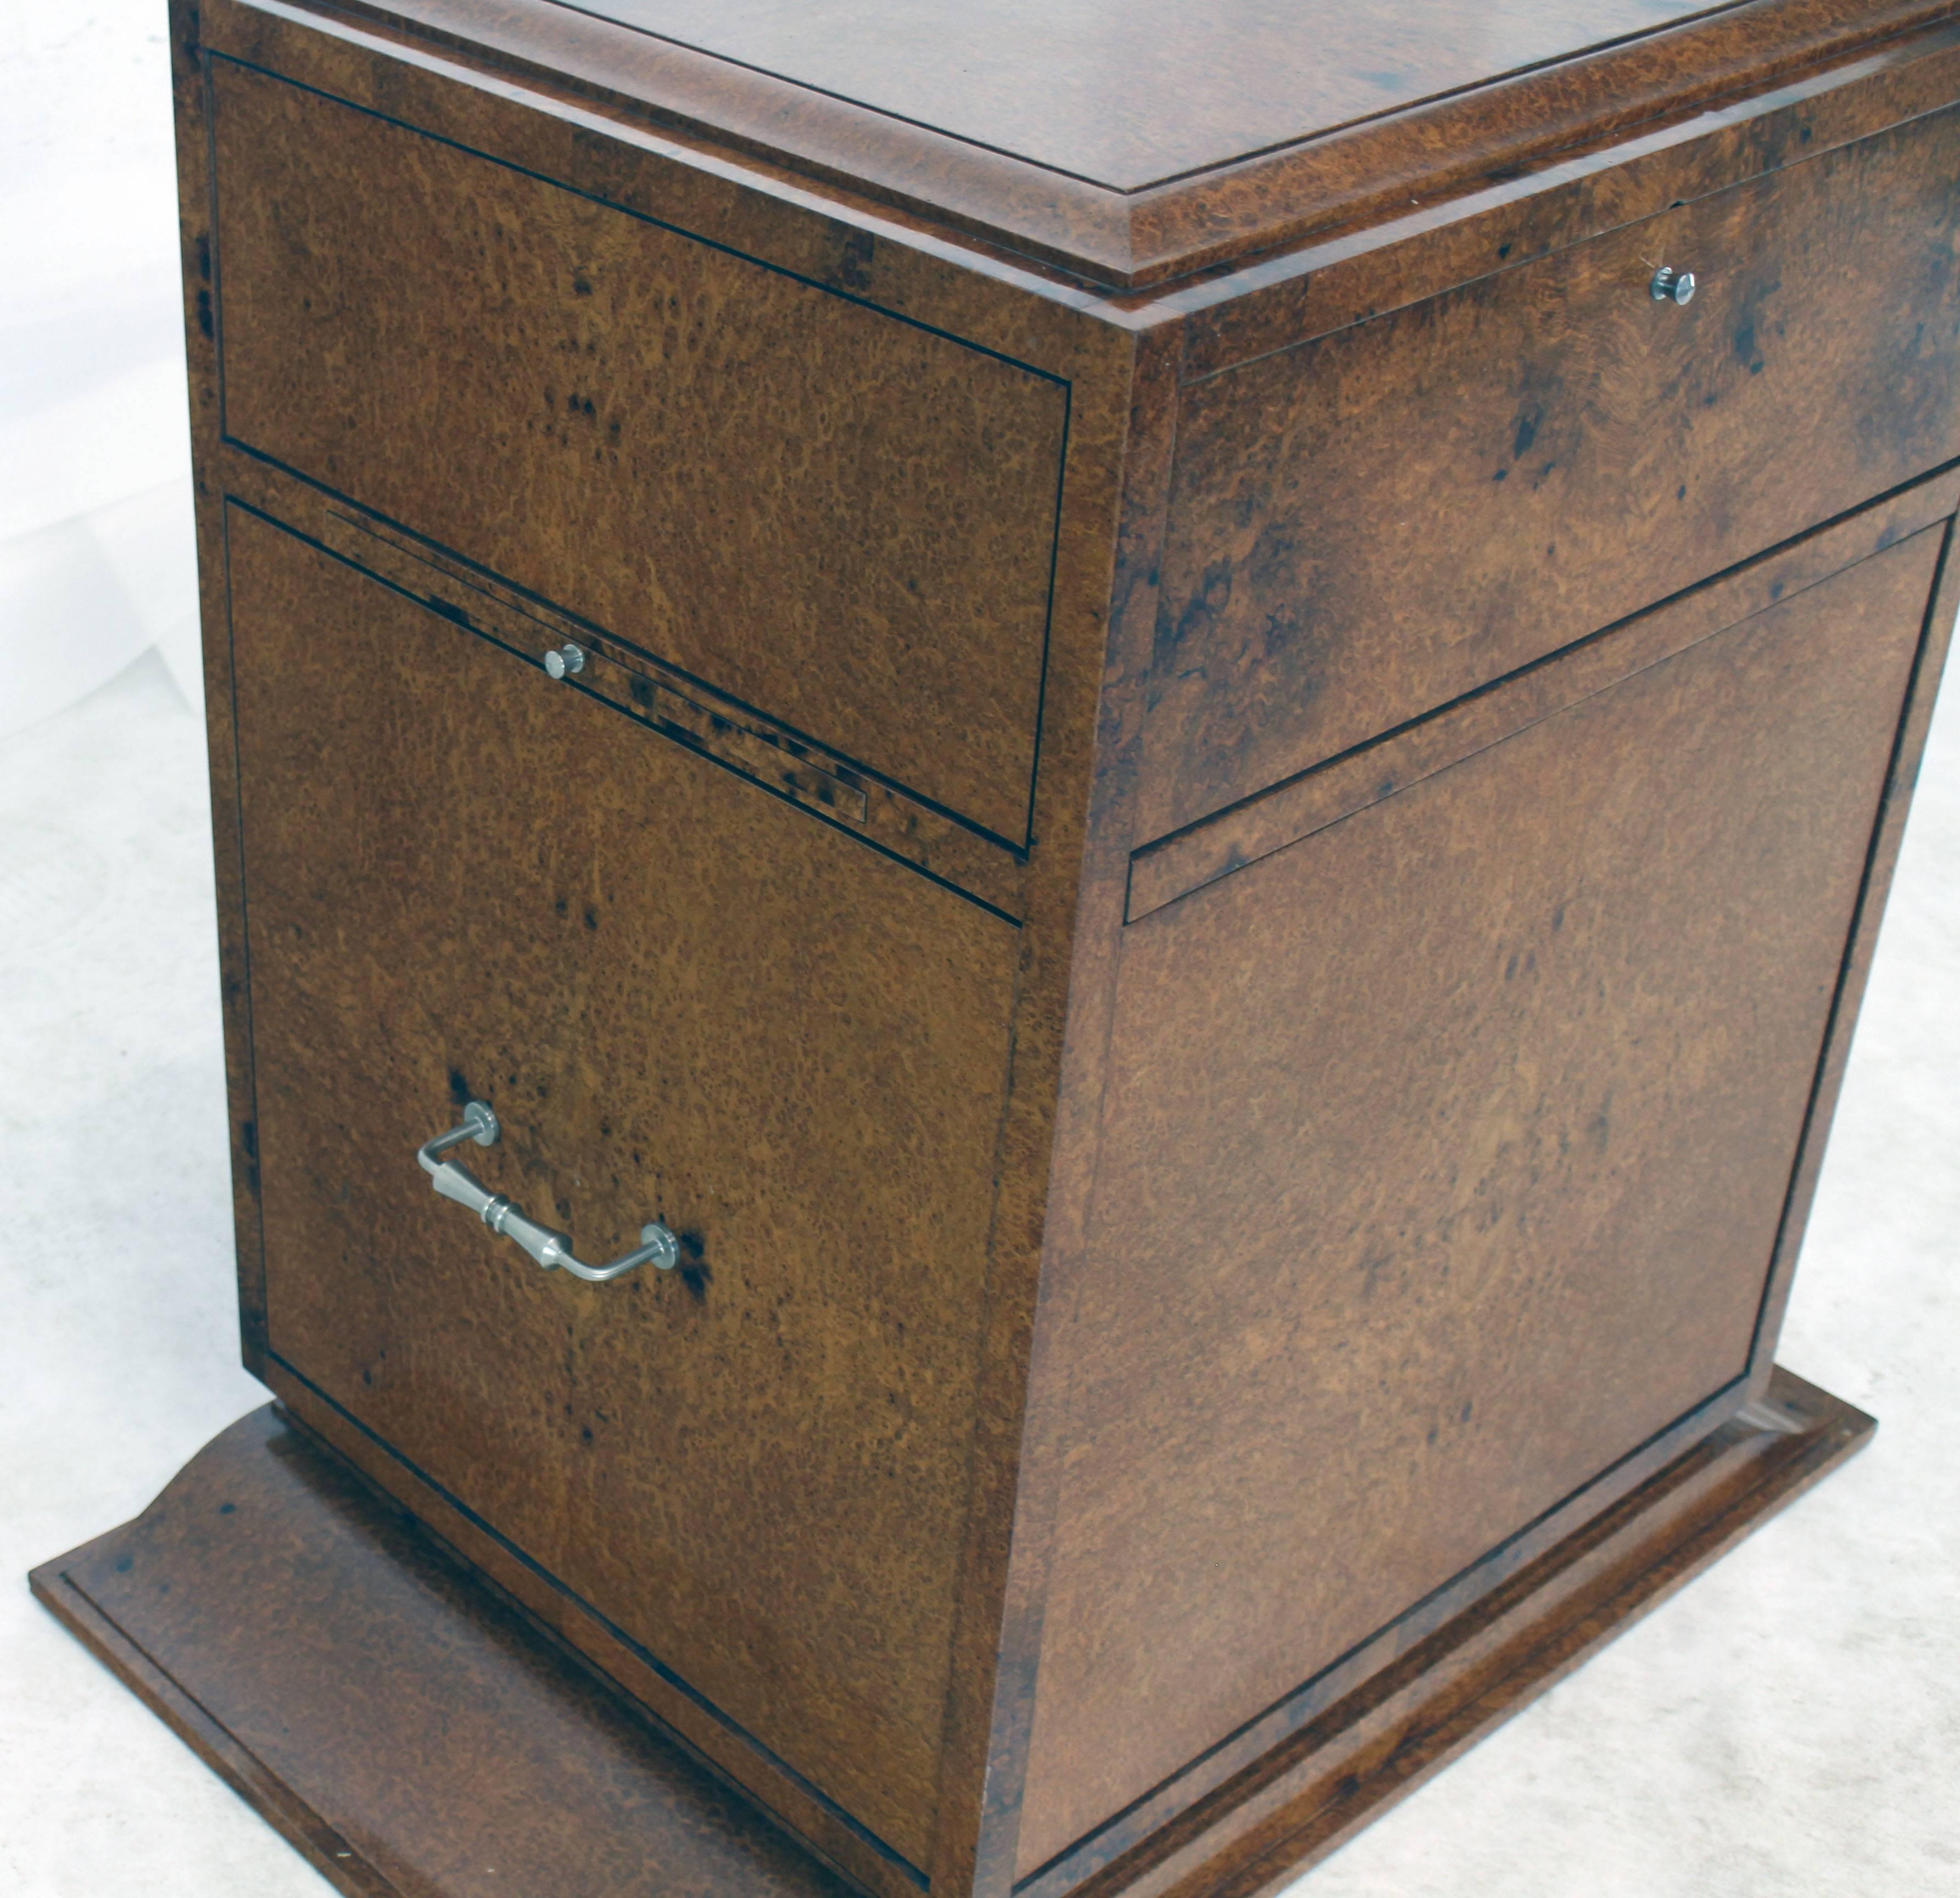 Interesting superb quality modern bird's-eye maple cabinet with many interesting feature and compartments as pictured. It could be used as a nice hall or entry cabinet or a wide pedestal.